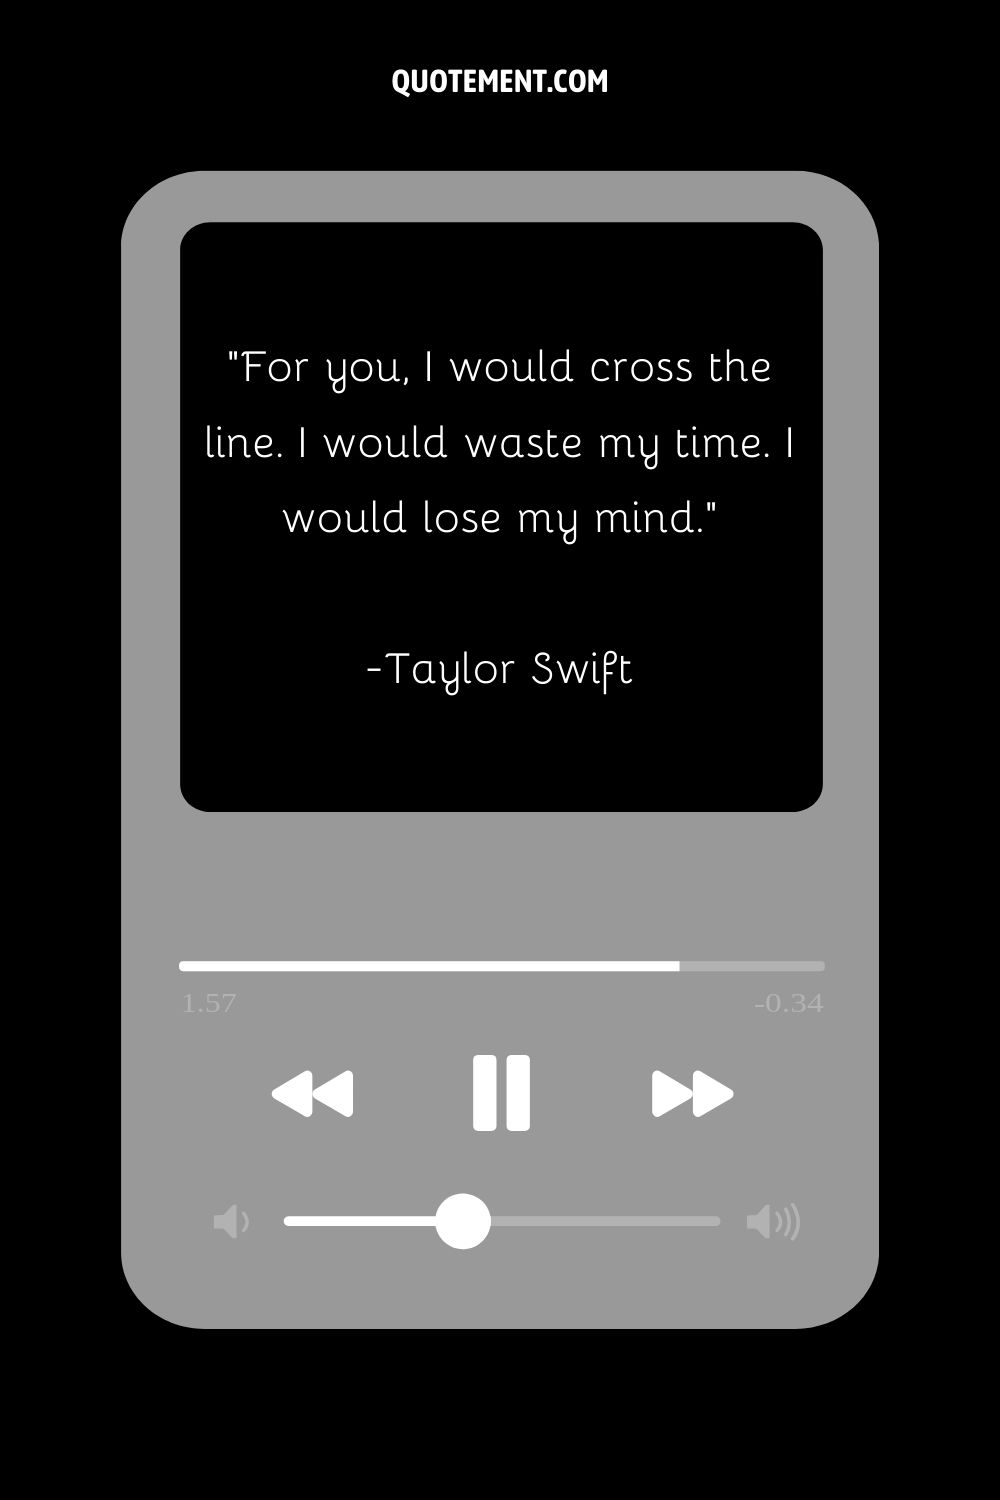 “For you, I would cross the line. I would waste my time. I would lose my mind.” — Taylor Swift